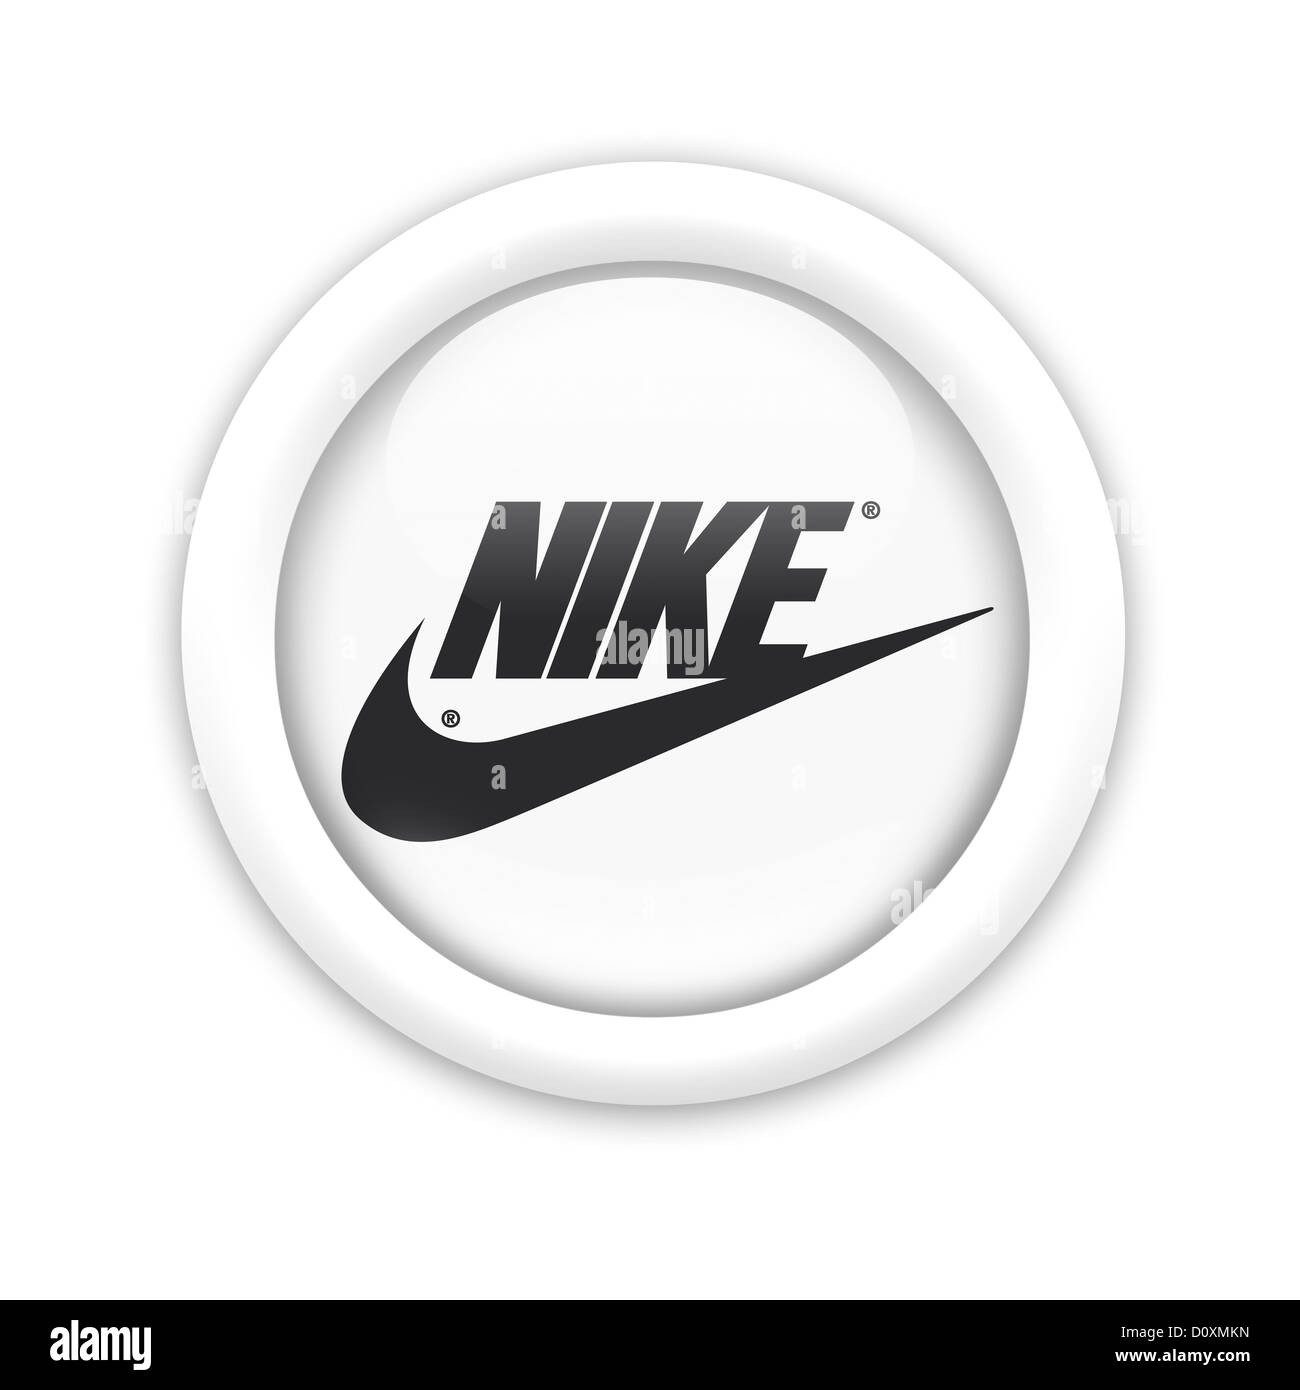 Nike logo Cut Out Stock Images & Pictures - Alamy